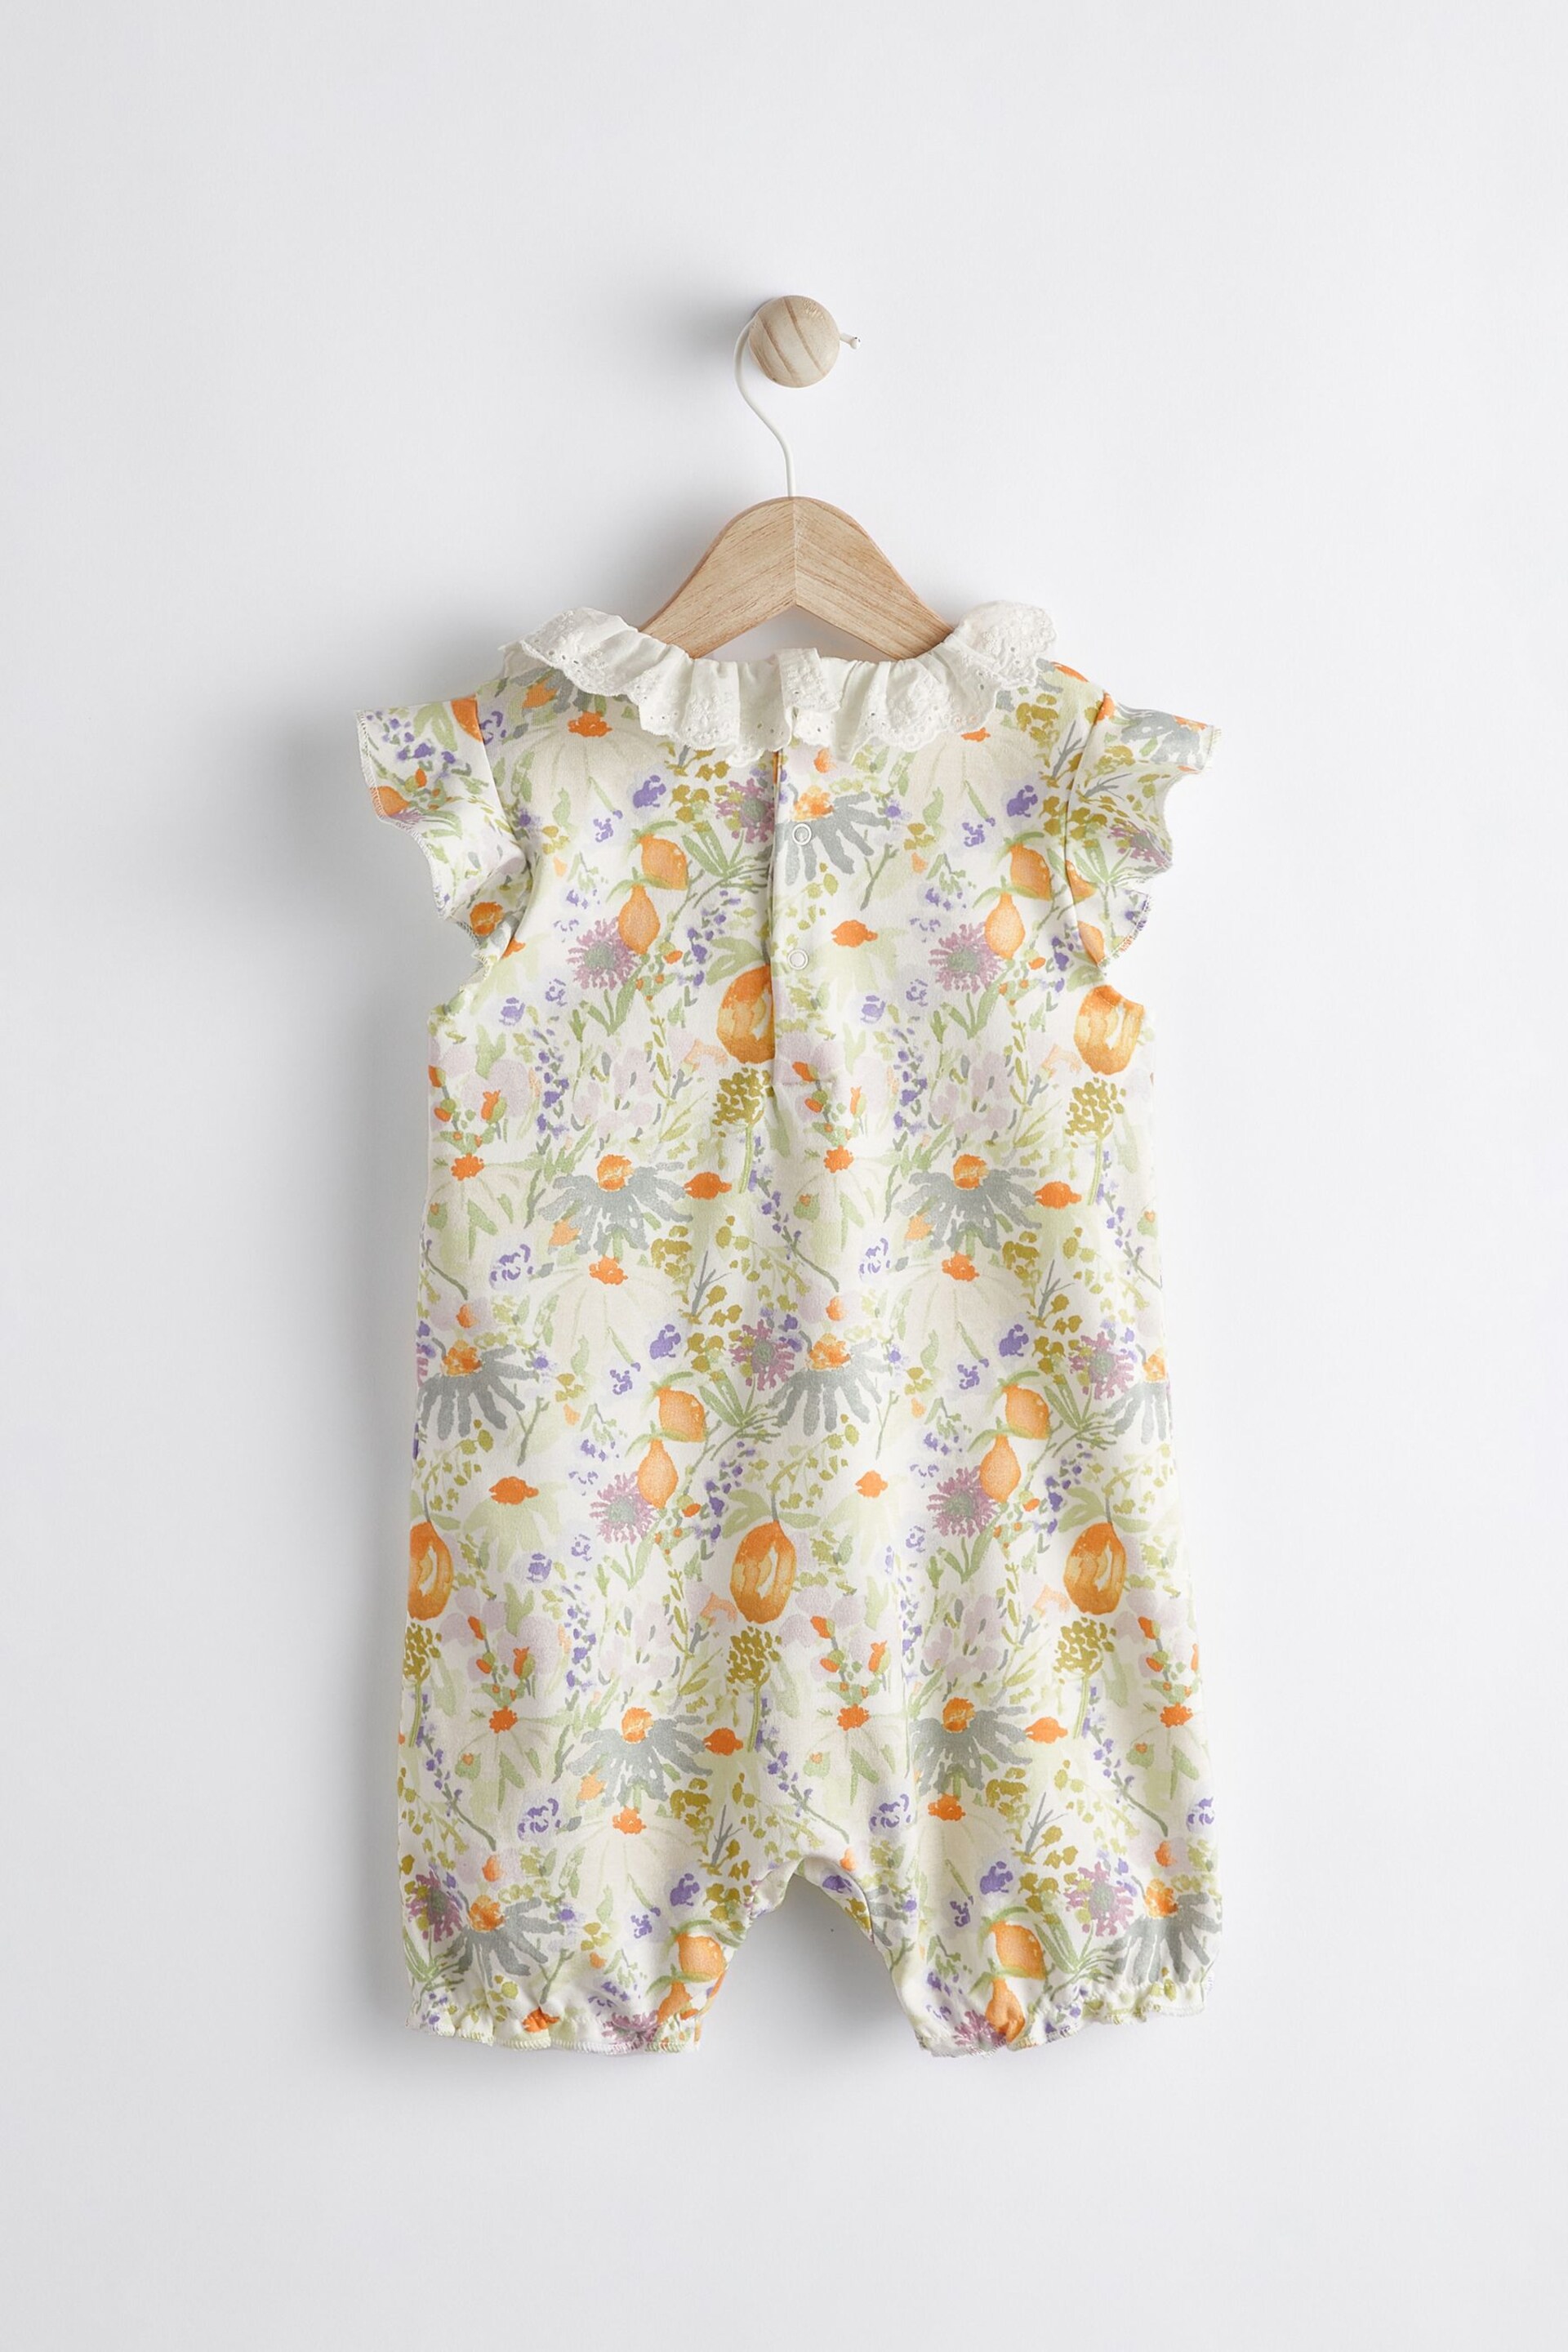 Blue/Yellow Collared Floral Baby Jersey Romper - Image 5 of 10